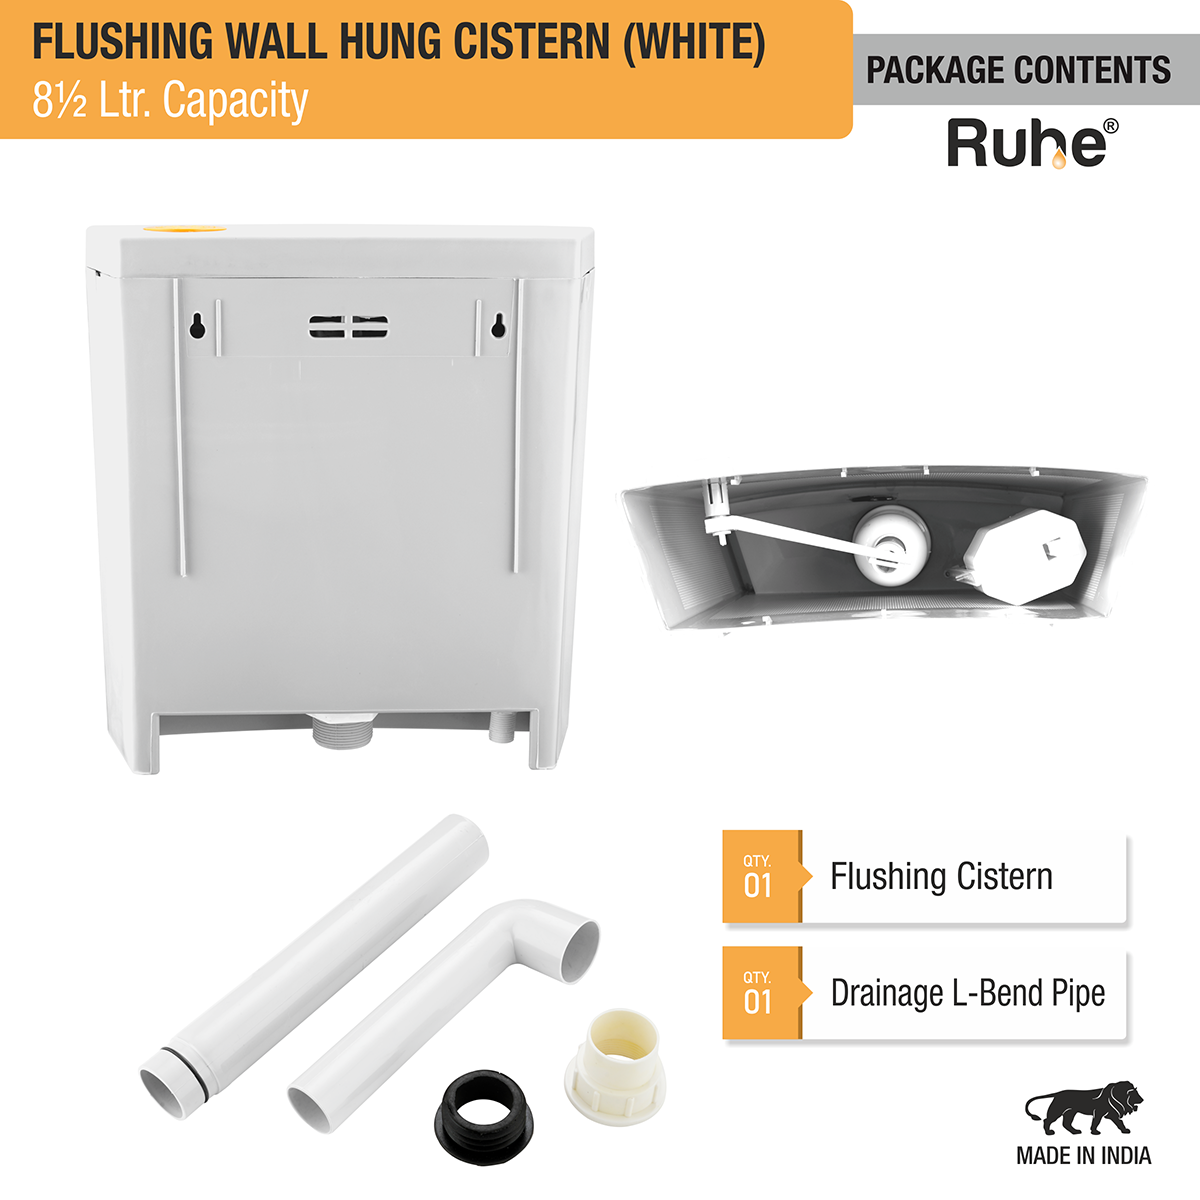 Flushing Wall Hung Cistern 8.5 Ltr. (White) package content